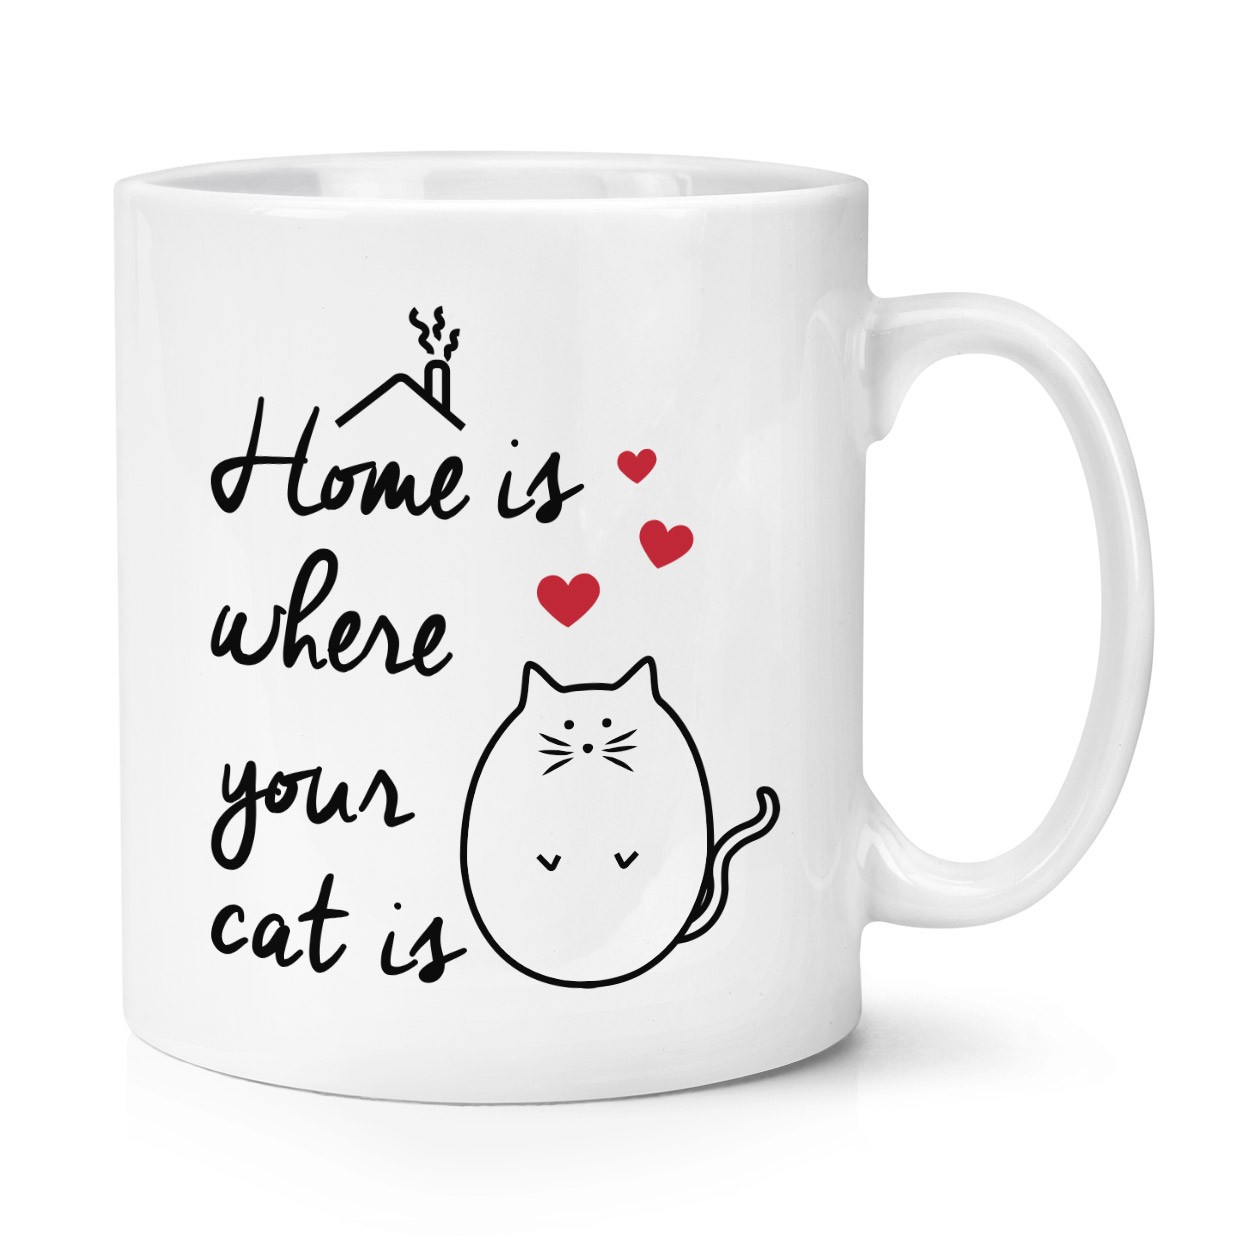 Home Is Where Your Cat Is 10oz Mug Cup